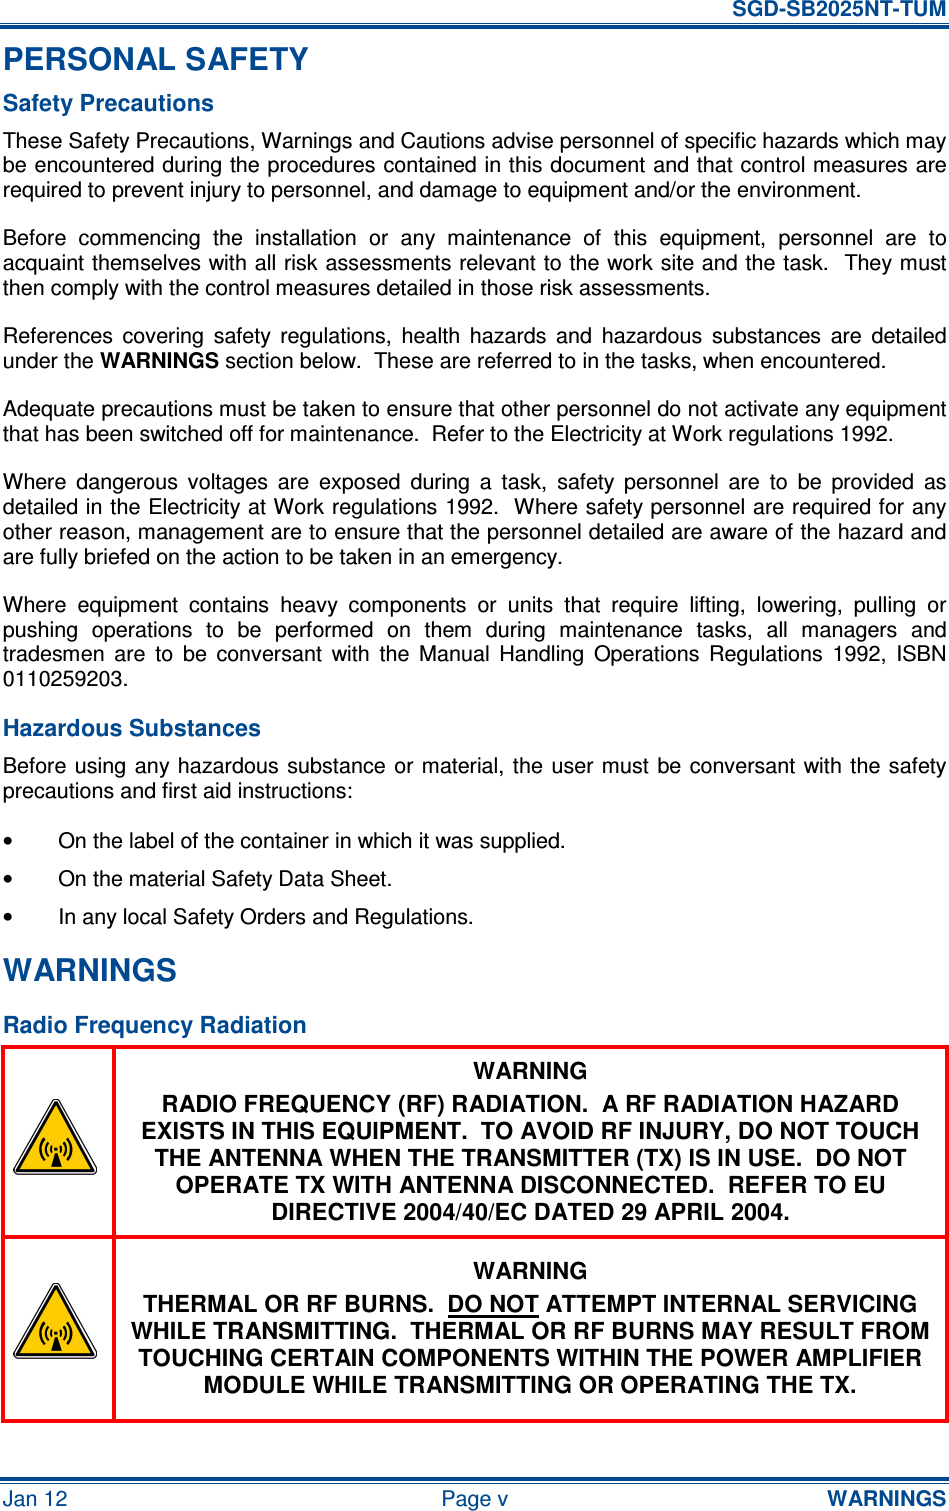   SGD-SB2025NT-TUM Jan 12  Page v  WARNINGS PERSONAL SAFETY Safety Precautions These Safety Precautions, Warnings and Cautions advise personnel of specific hazards which may be encountered during the procedures contained in this document and that control measures are required to prevent injury to personnel, and damage to equipment and/or the environment. Before  commencing  the  installation  or  any  maintenance  of  this  equipment,  personnel  are  to acquaint themselves with all risk assessments relevant to the work site and the task.  They must then comply with the control measures detailed in those risk assessments. References  covering  safety  regulations,  health  hazards  and  hazardous  substances  are  detailed under the WARNINGS section below.  These are referred to in the tasks, when encountered. Adequate precautions must be taken to ensure that other personnel do not activate any equipment that has been switched off for maintenance.  Refer to the Electricity at Work regulations 1992. Where  dangerous  voltages  are  exposed  during  a  task,  safety  personnel  are  to  be  provided  as detailed in the Electricity at Work regulations 1992.  Where safety personnel are required for any other reason, management are to ensure that the personnel detailed are aware of the hazard and are fully briefed on the action to be taken in an emergency. Where  equipment  contains  heavy  components  or  units  that  require  lifting,  lowering,  pulling  or pushing  operations  to  be  performed  on  them  during  maintenance  tasks,  all  managers  and tradesmen  are  to  be  conversant  with  the  Manual  Handling  Operations  Regulations  1992,  ISBN 0110259203. Hazardous Substances Before using any hazardous  substance or material, the  user  must  be conversant  with the safety precautions and first aid instructions: •  On the label of the container in which it was supplied. •  On the material Safety Data Sheet. •  In any local Safety Orders and Regulations. WARNINGS Radio Frequency Radiation  WARNING RADIO FREQUENCY (RF) RADIATION.  A RF RADIATION HAZARD EXISTS IN THIS EQUIPMENT.  TO AVOID RF INJURY, DO NOT TOUCH THE ANTENNA WHEN THE TRANSMITTER (TX) IS IN USE.  DO NOT OPERATE TX WITH ANTENNA DISCONNECTED.  REFER TO EU DIRECTIVE 2004/40/EC DATED 29 APRIL 2004.  WARNING THERMAL OR RF BURNS.  DO NOT ATTEMPT INTERNAL SERVICING WHILE TRANSMITTING.  THERMAL OR RF BURNS MAY RESULT FROM TOUCHING CERTAIN COMPONENTS WITHIN THE POWER AMPLIFIER MODULE WHILE TRANSMITTING OR OPERATING THE TX. 